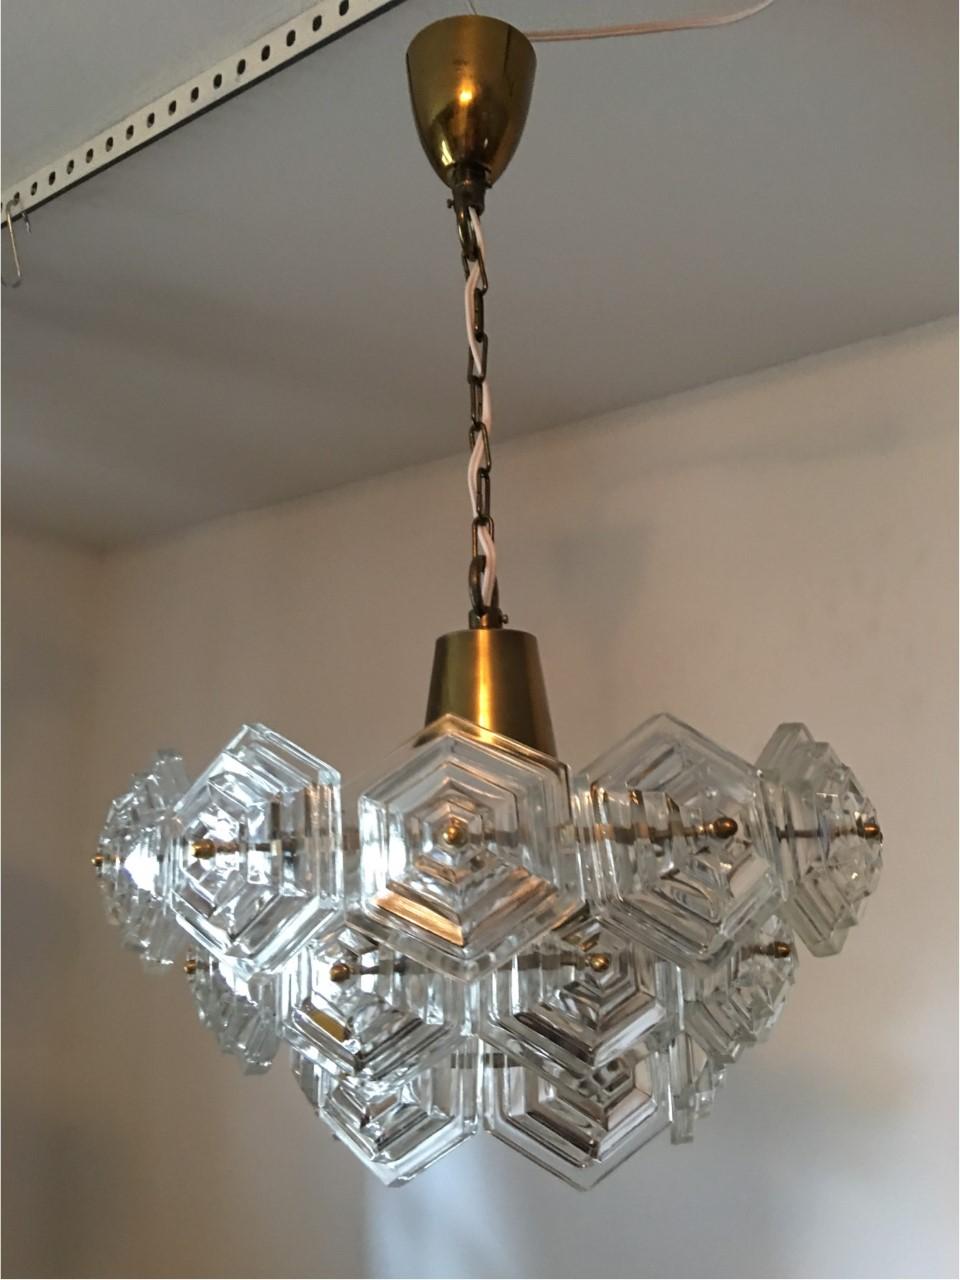 Chandelier with hexagonal glass crystal hanging from a brass chain, 1970s, Germany. The fixture requires one European E 26 / E27 Edison bulb, bulb up to 60 watts. Rewired to meet U.S. standards.